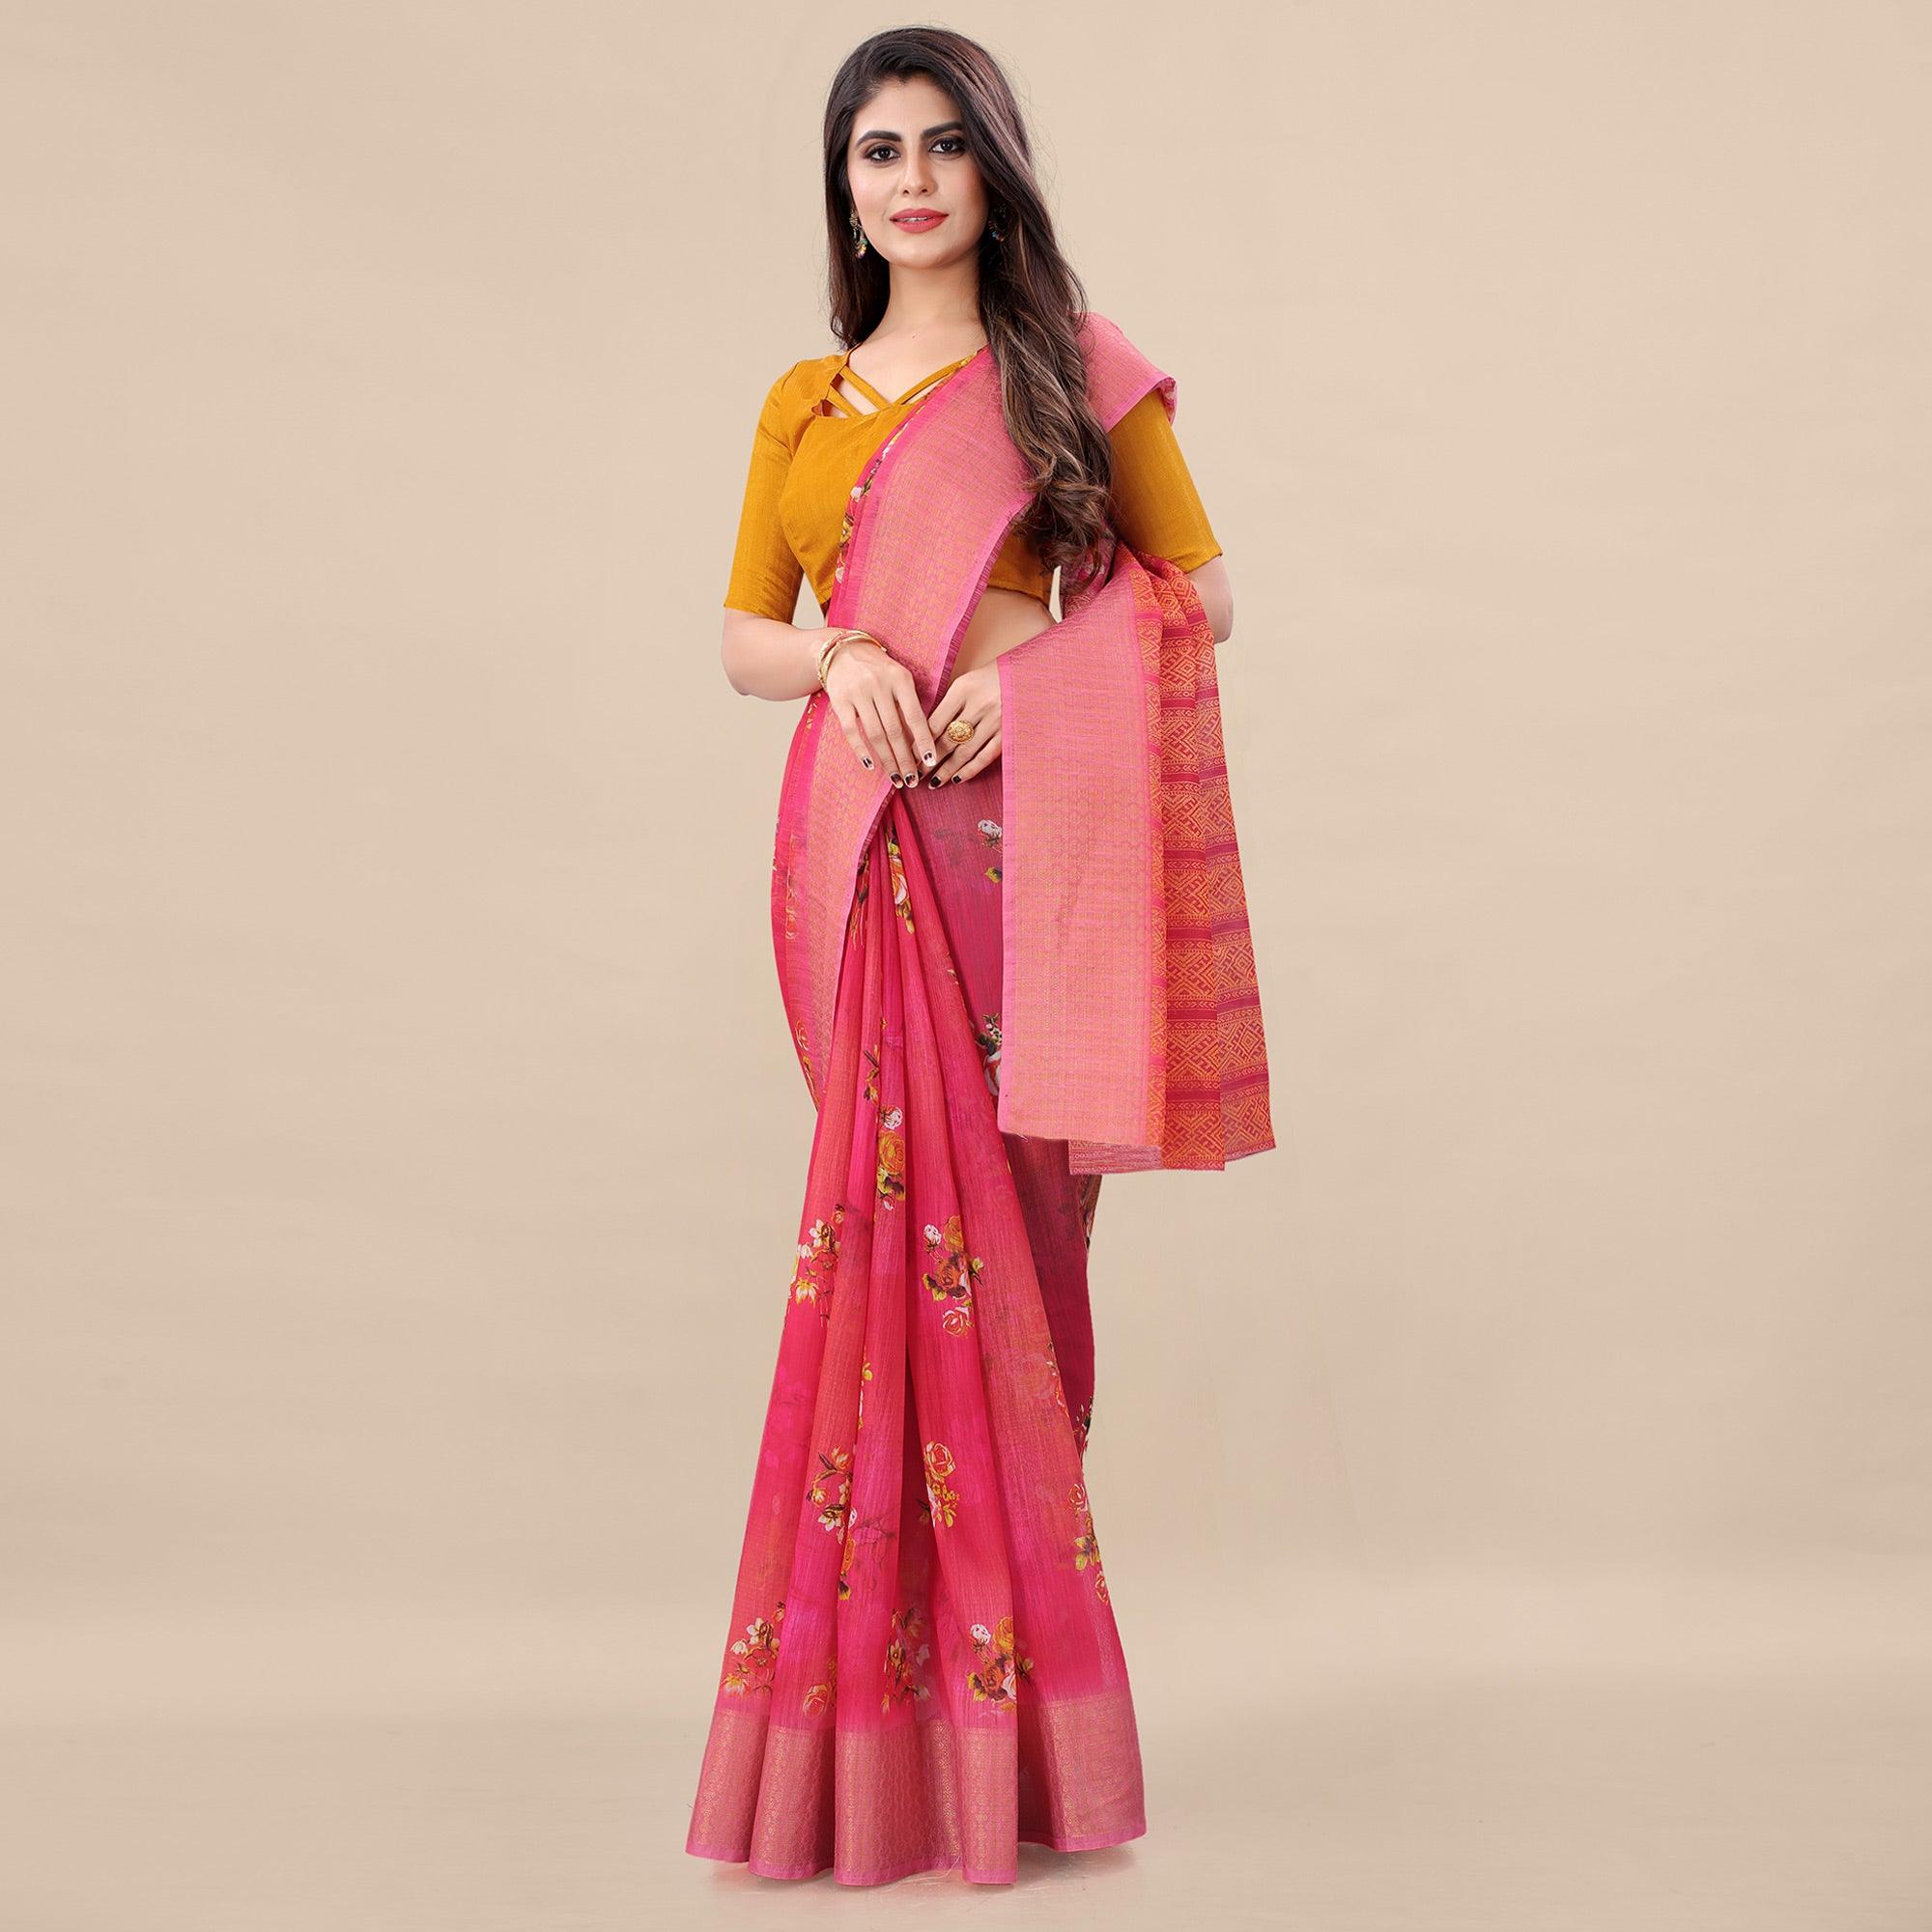 Pink Casual Wear Floral Digital Printed Cotton Saree With Woven Border - Peachmode